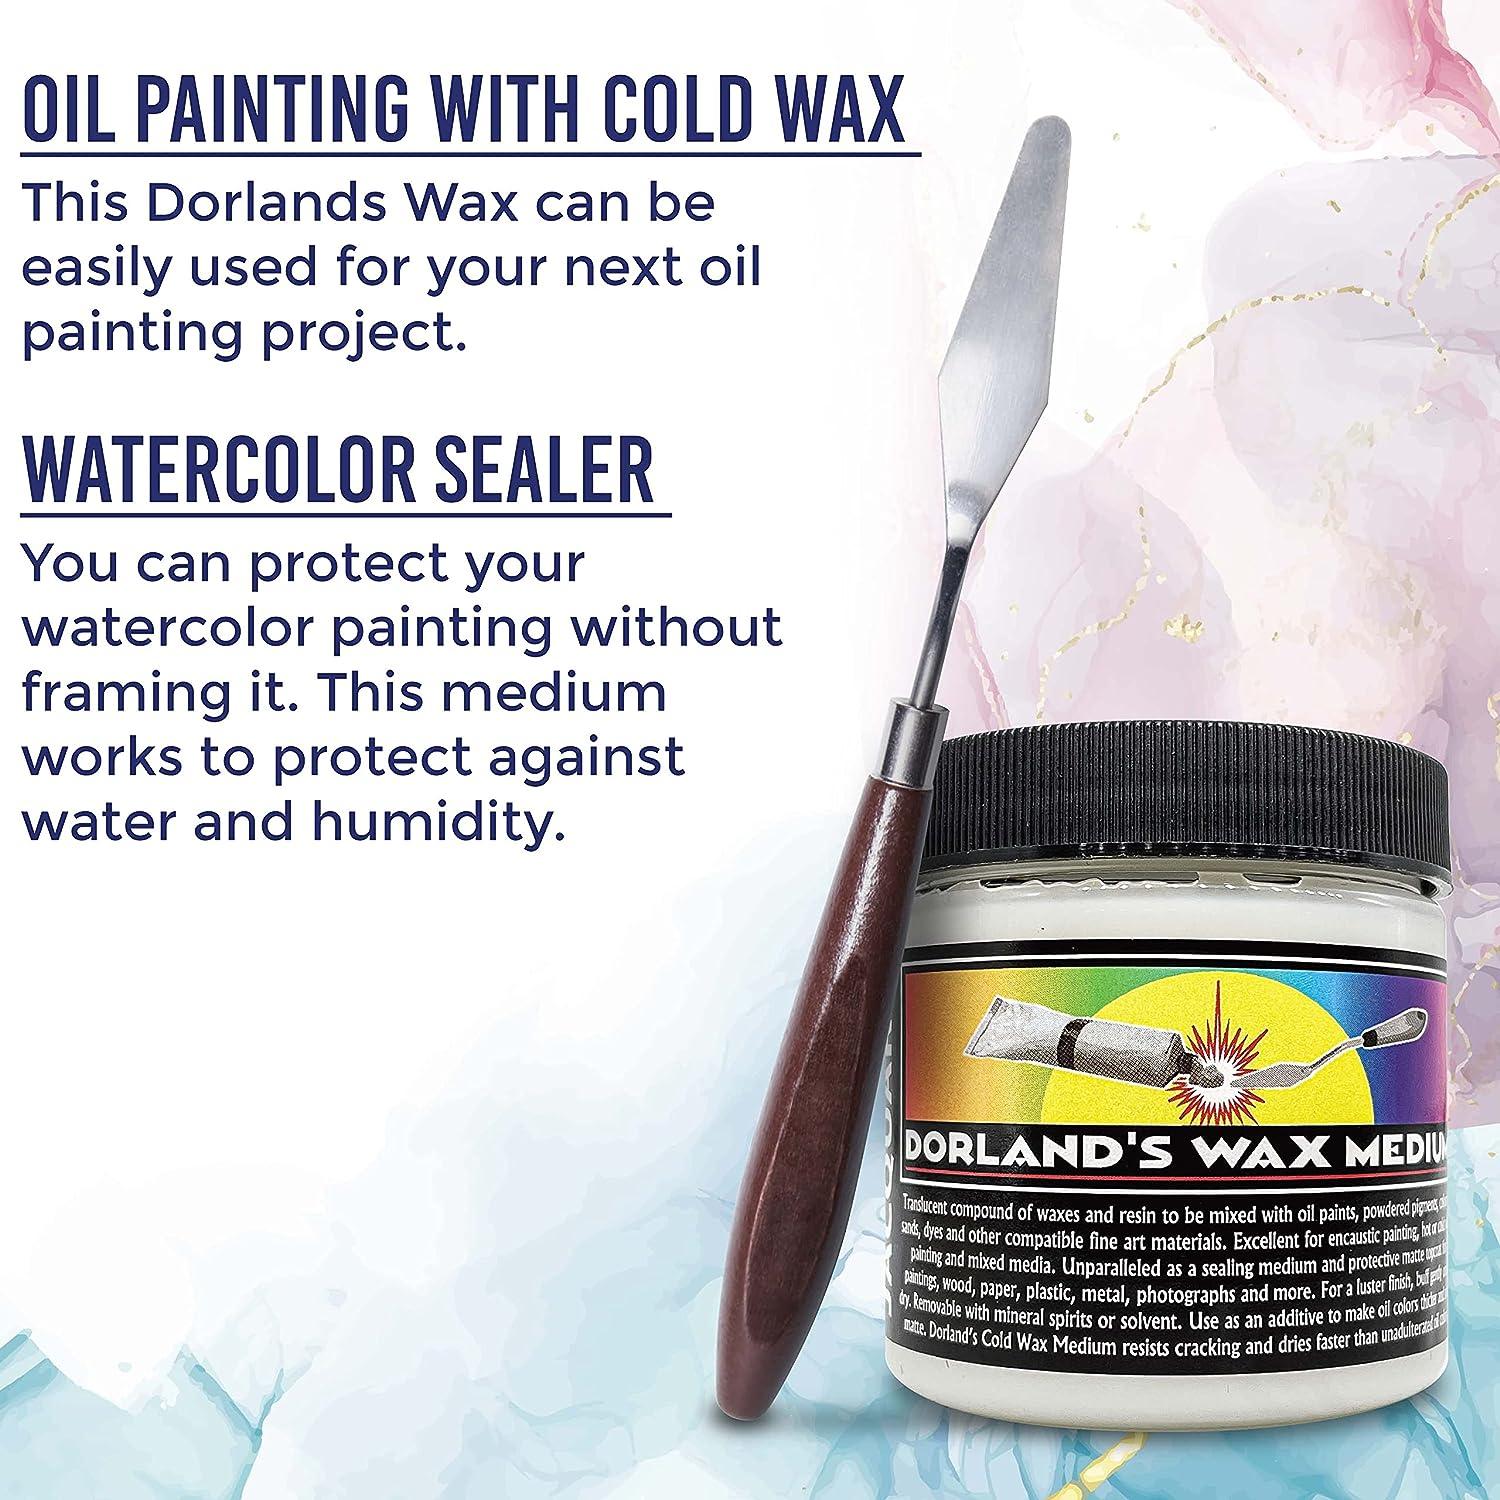 Jacquard Dorlands Wax - 16 Ounce - Versatile Pure Wax and Damar Resin -  Protective Topcoat for Sealing and Finishing Best Deals and Price History  at